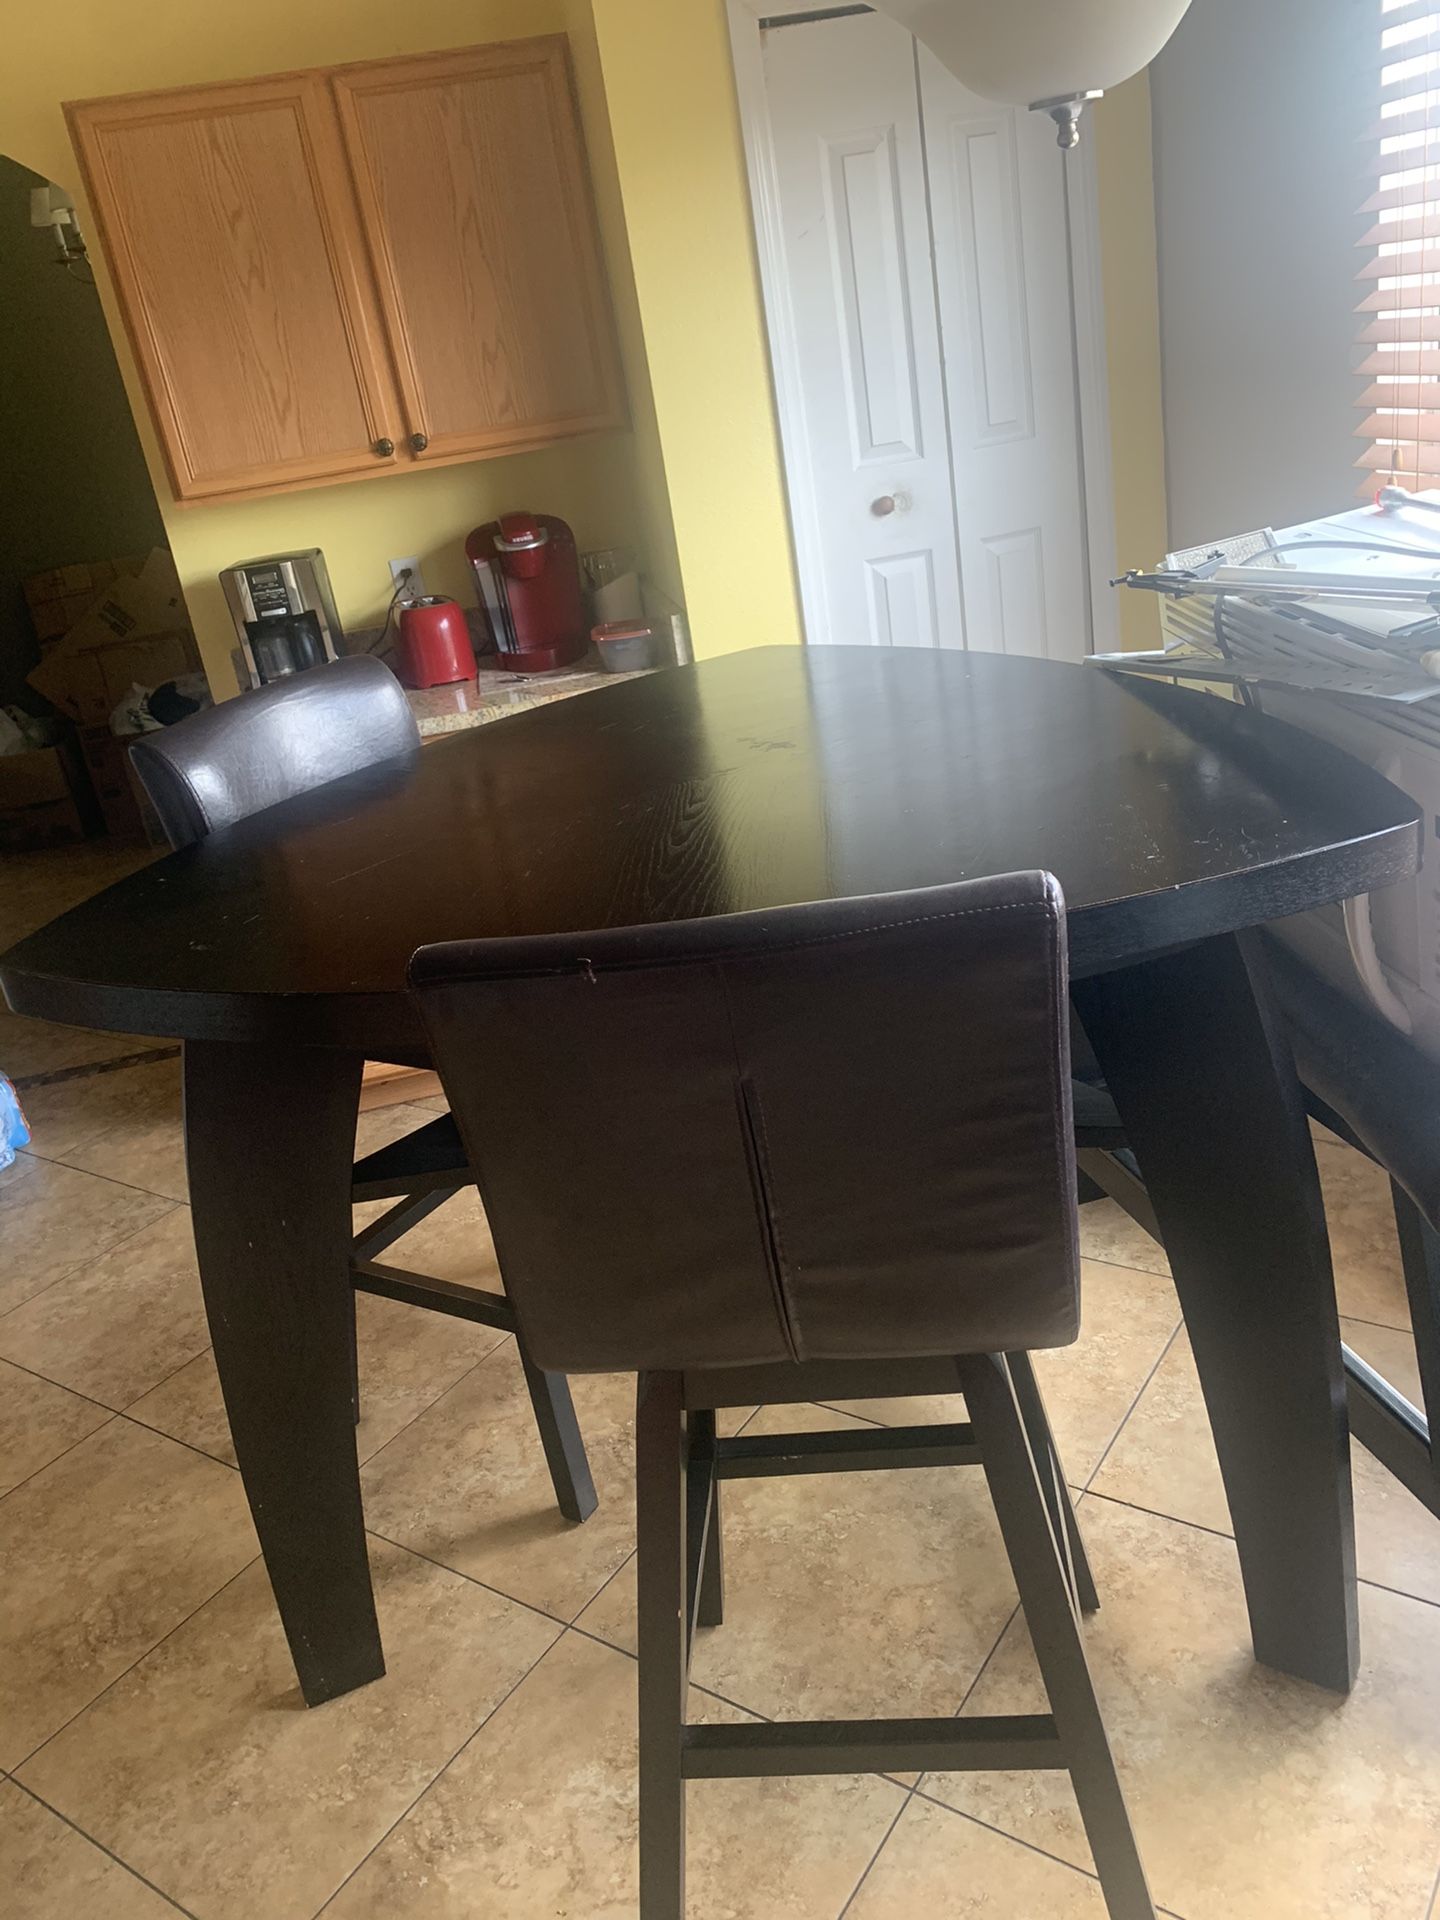 Kitchen Table w/ bar stool chairs